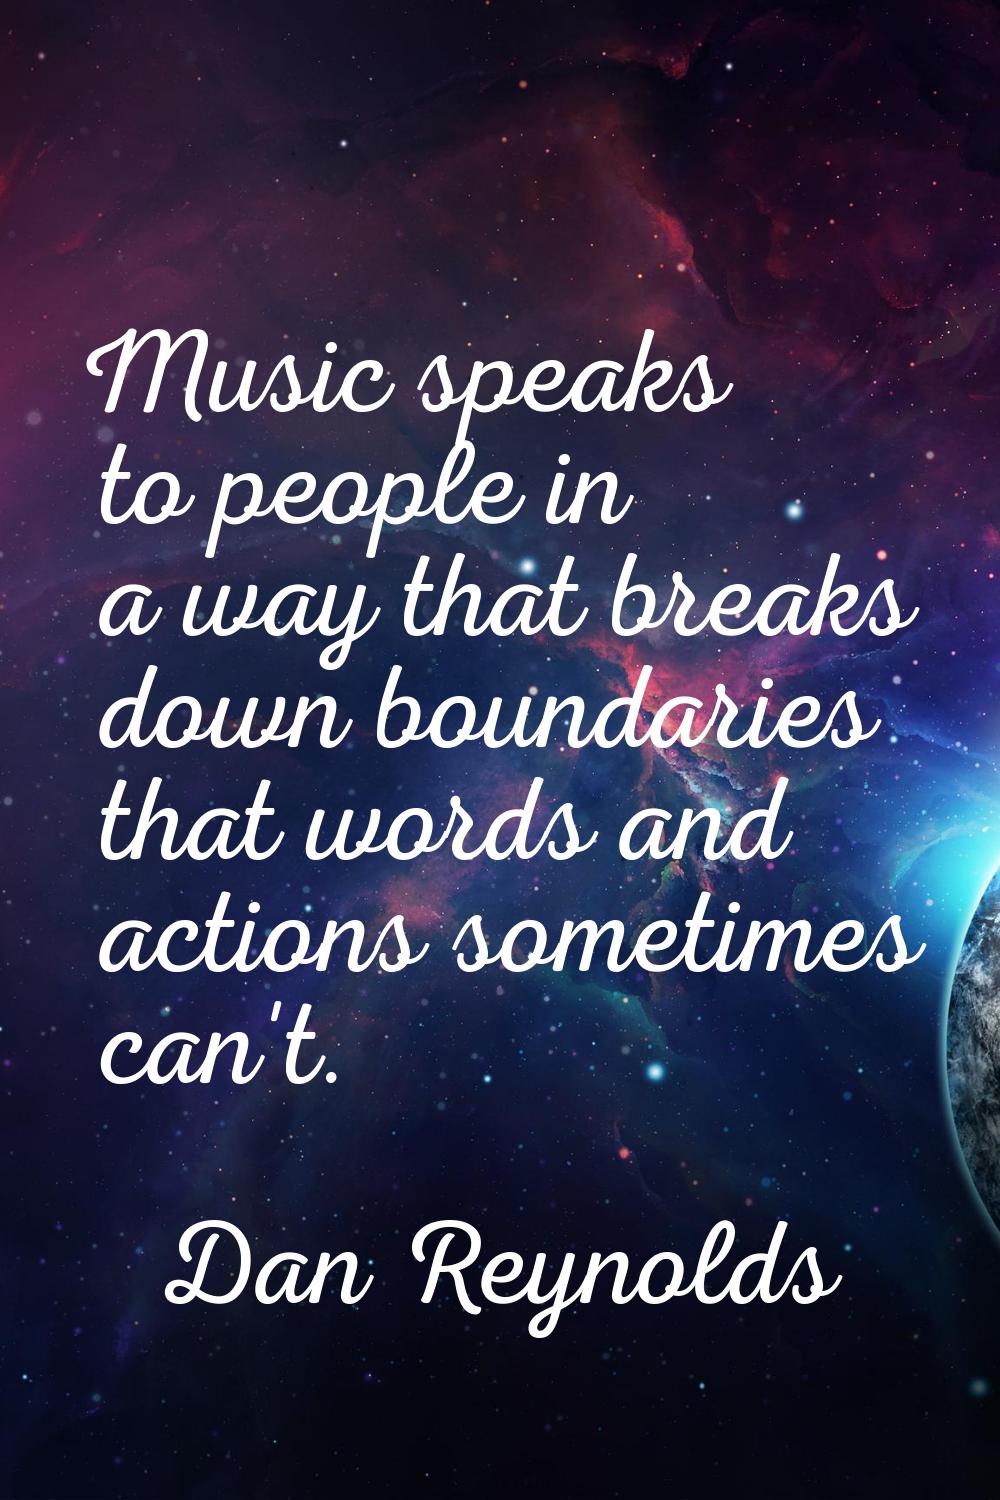 Music speaks to people in a way that breaks down boundaries that words and actions sometimes can't.